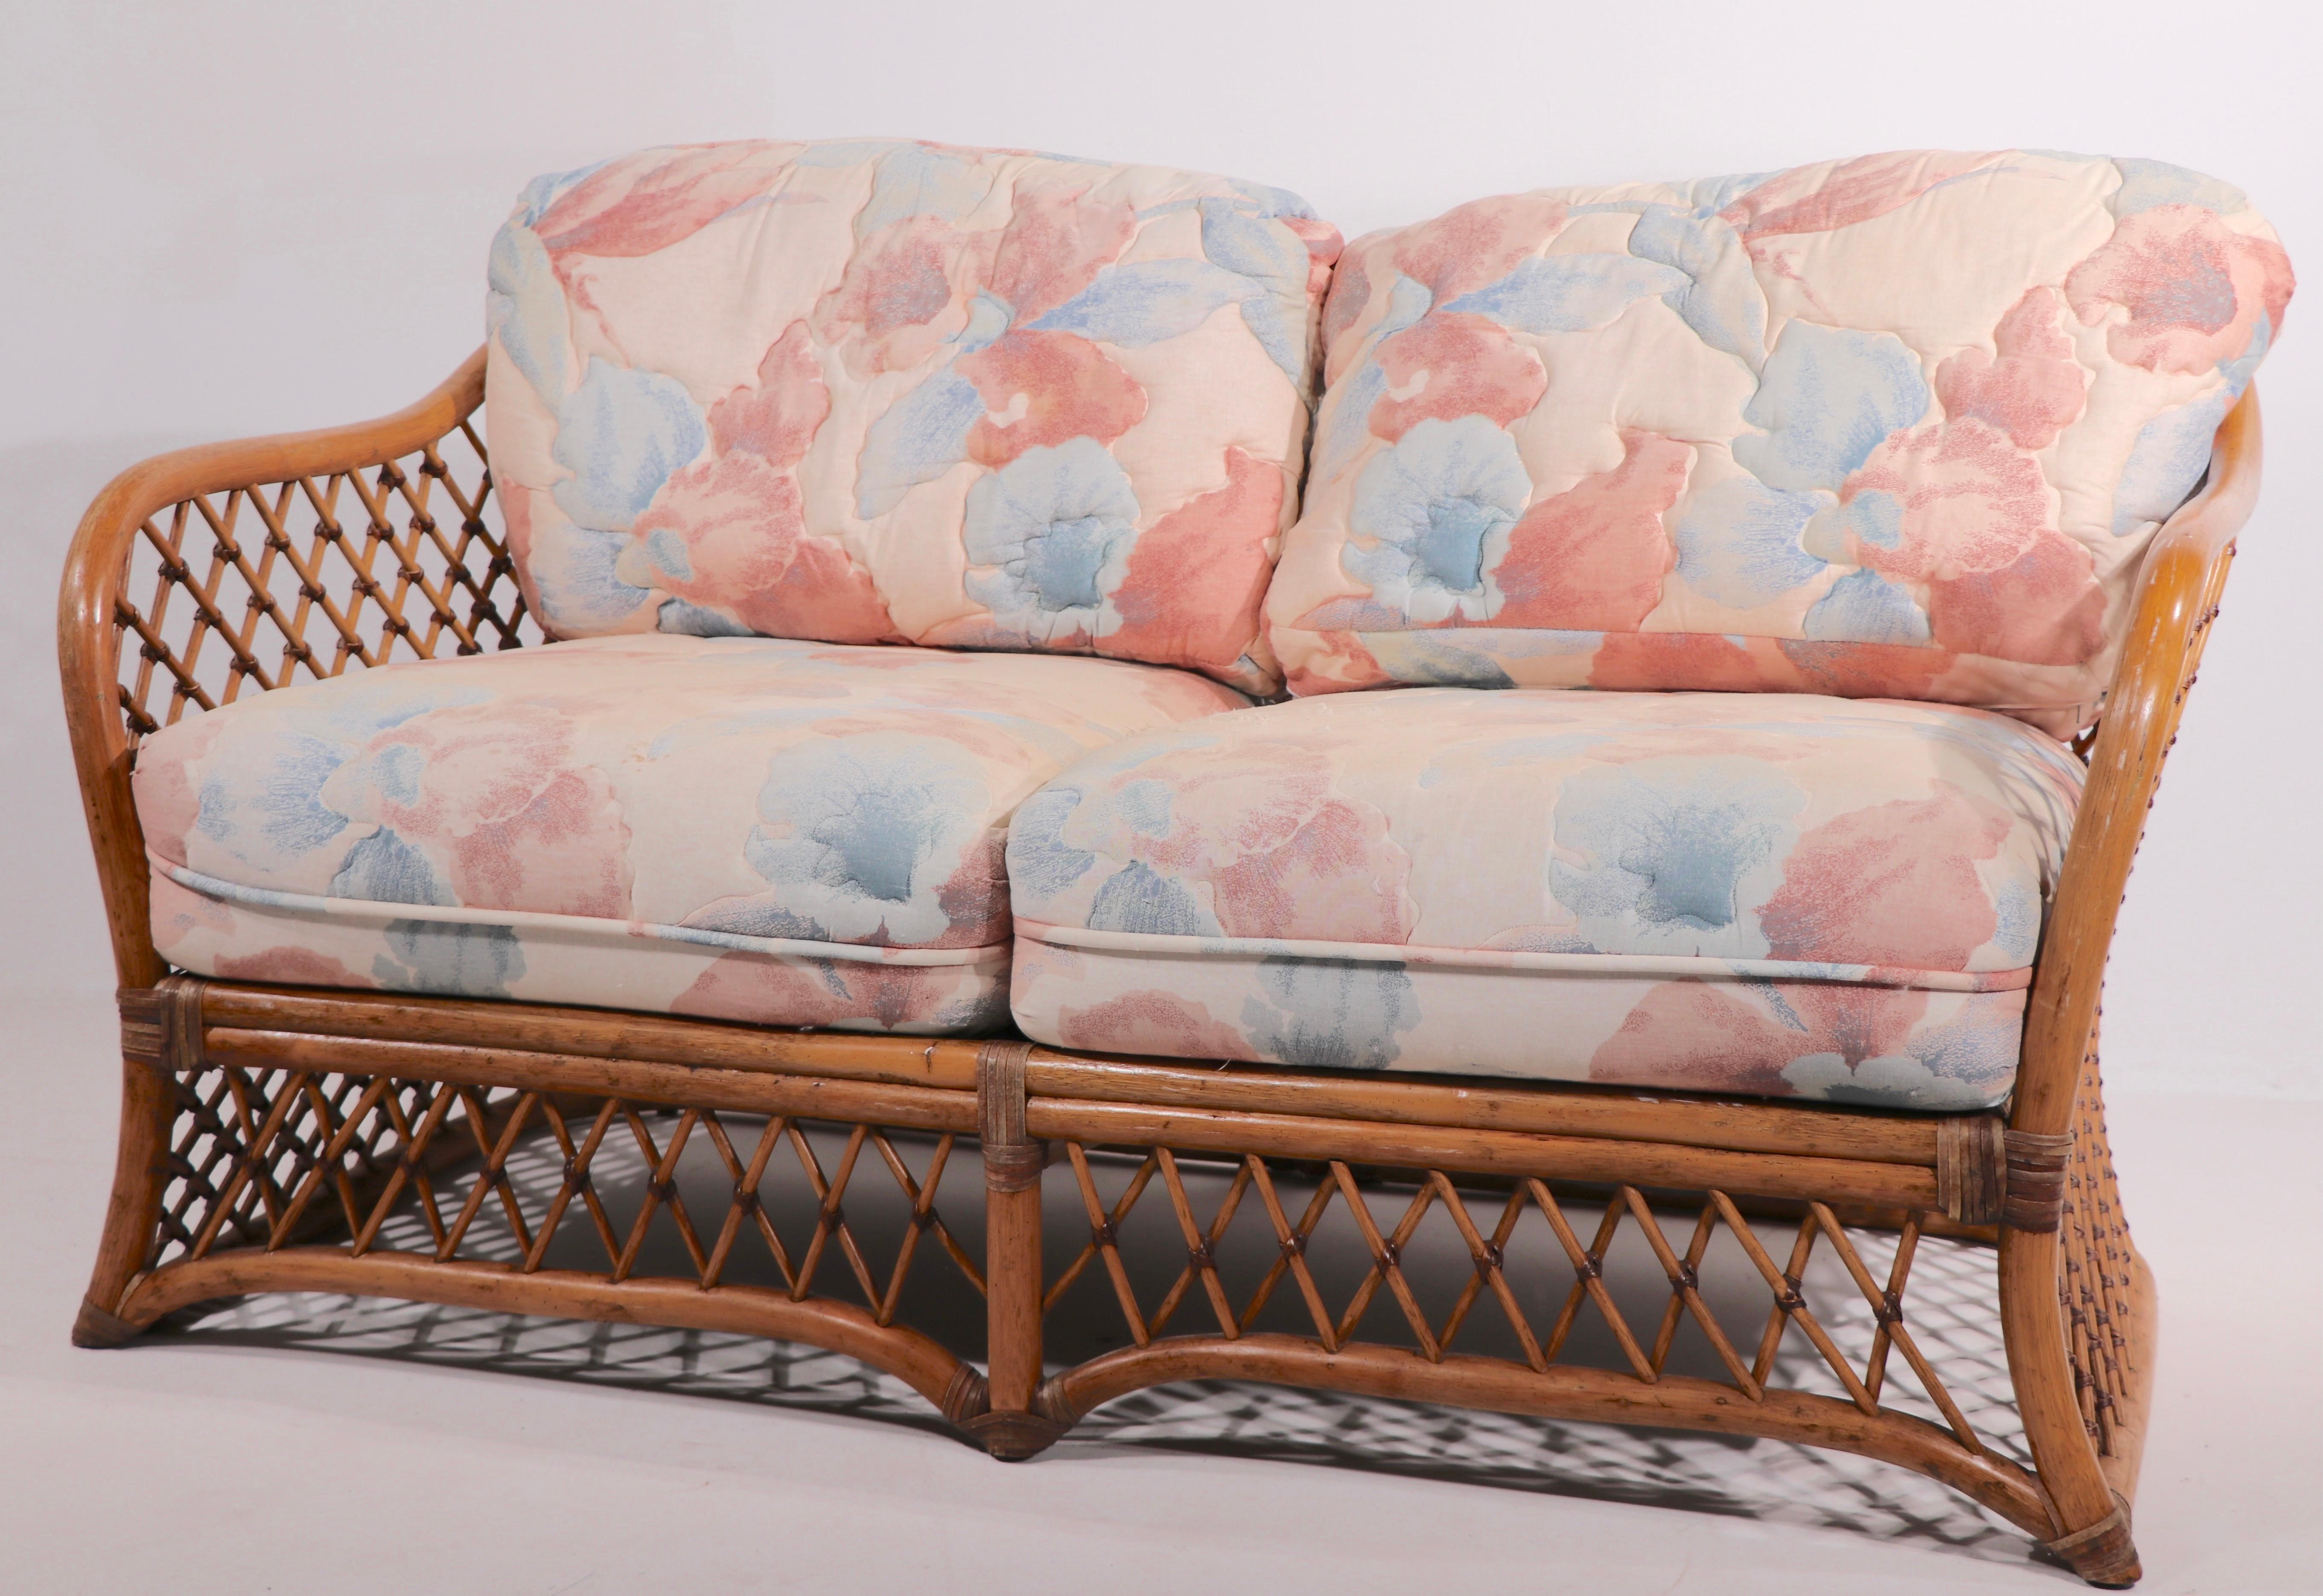 Chic bamboo settee, sofa, loveseat having a curved woven bamboo seat and back, on bamboo frame, with thick cushions. The sofa is in very good, original condition, showing only light fading to the fabric, normal and consistent with age. In the style